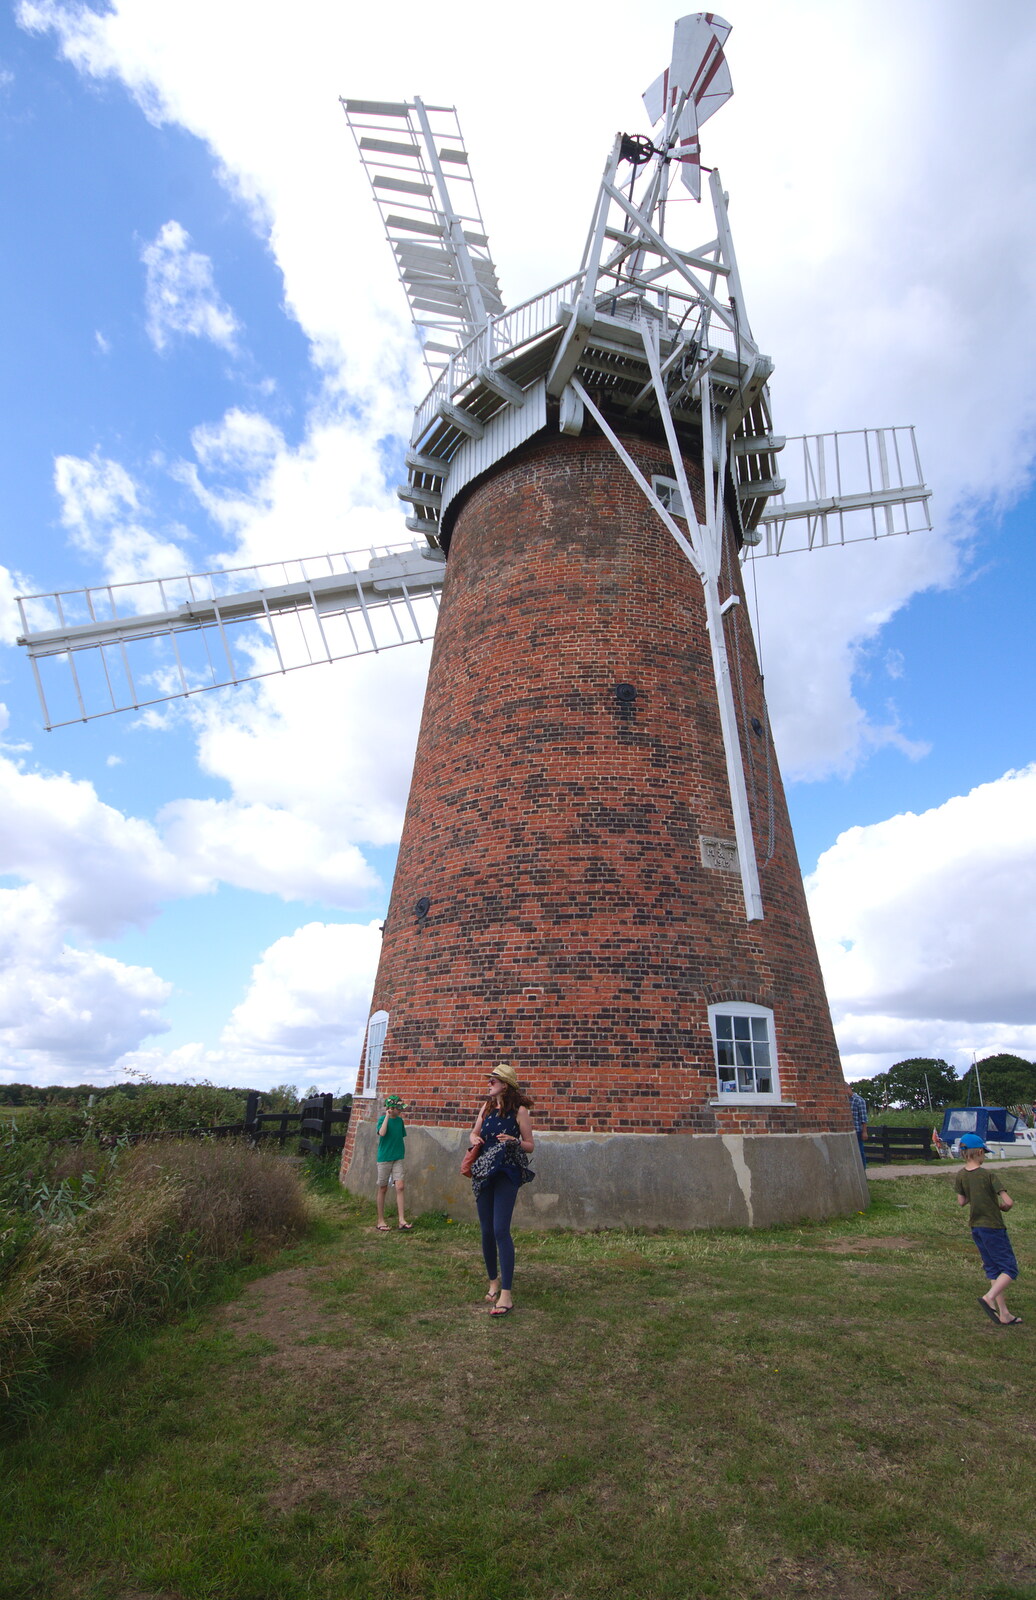 Isobel and the boys mill around from Waxham Sands and the Nelson Head Beer Festival, Horsey, Norfolk - 31st August 2019